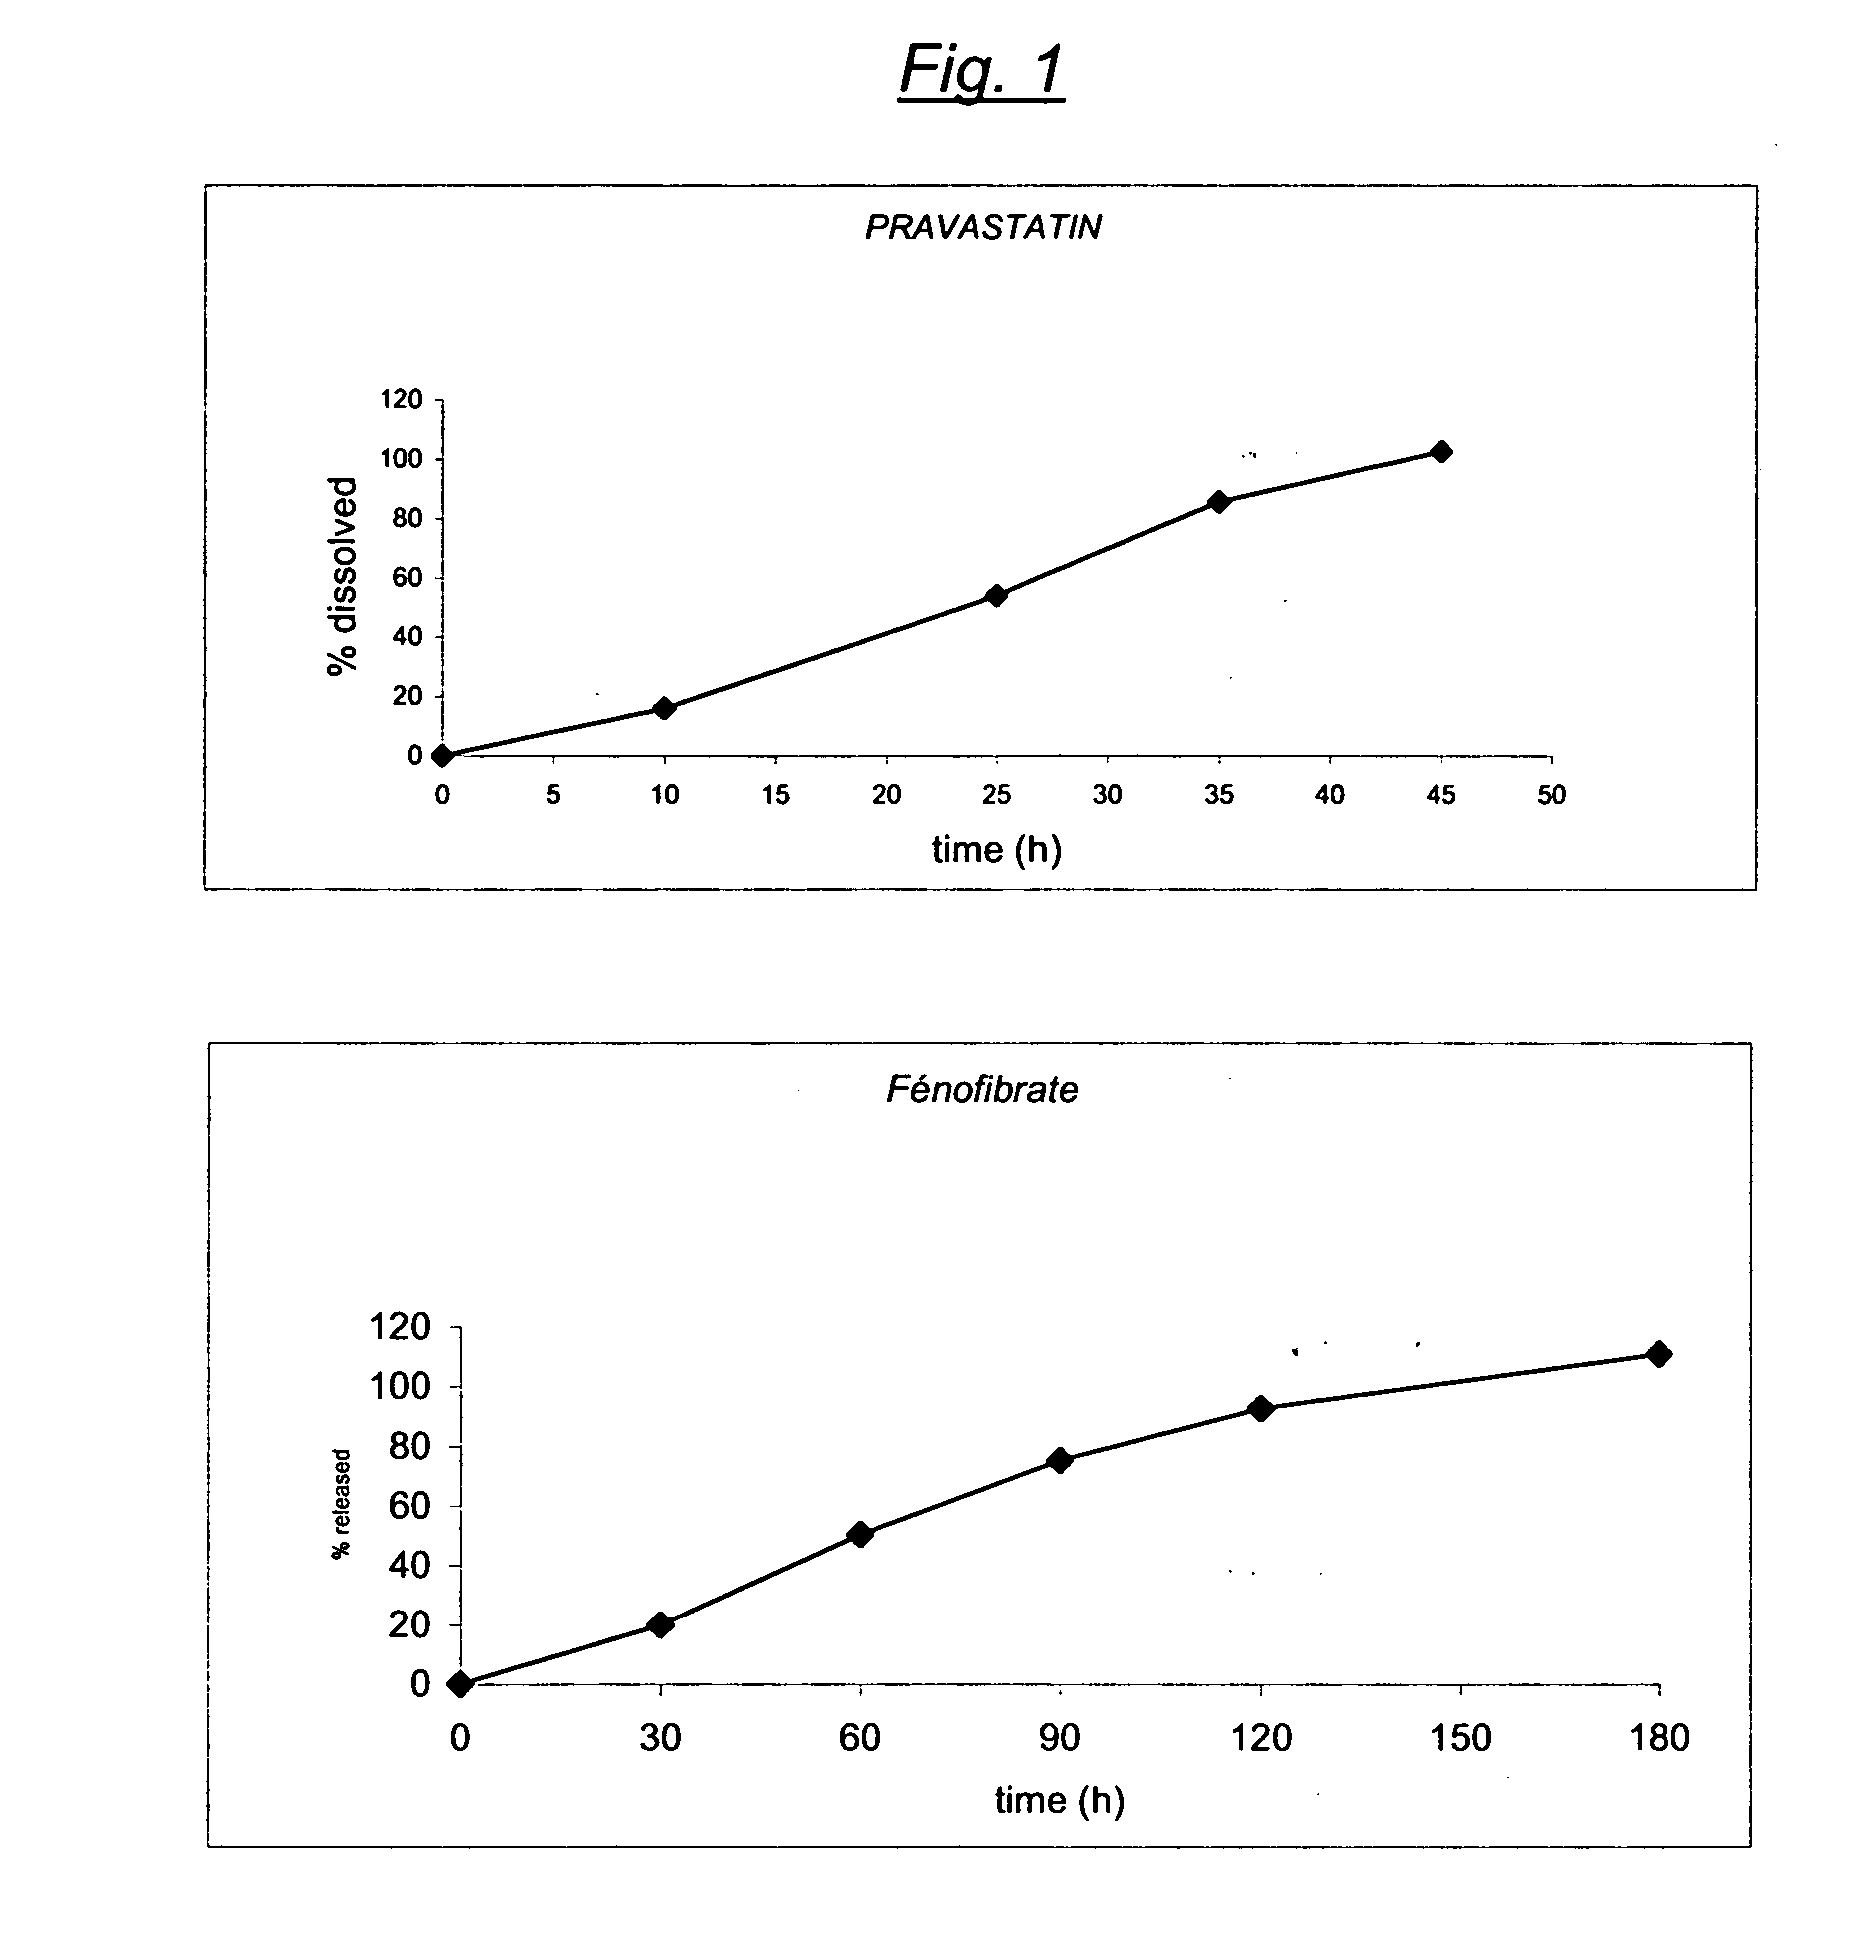 Stable controlled release pharmaceutical compositions containing fenofibrate and pravastatin